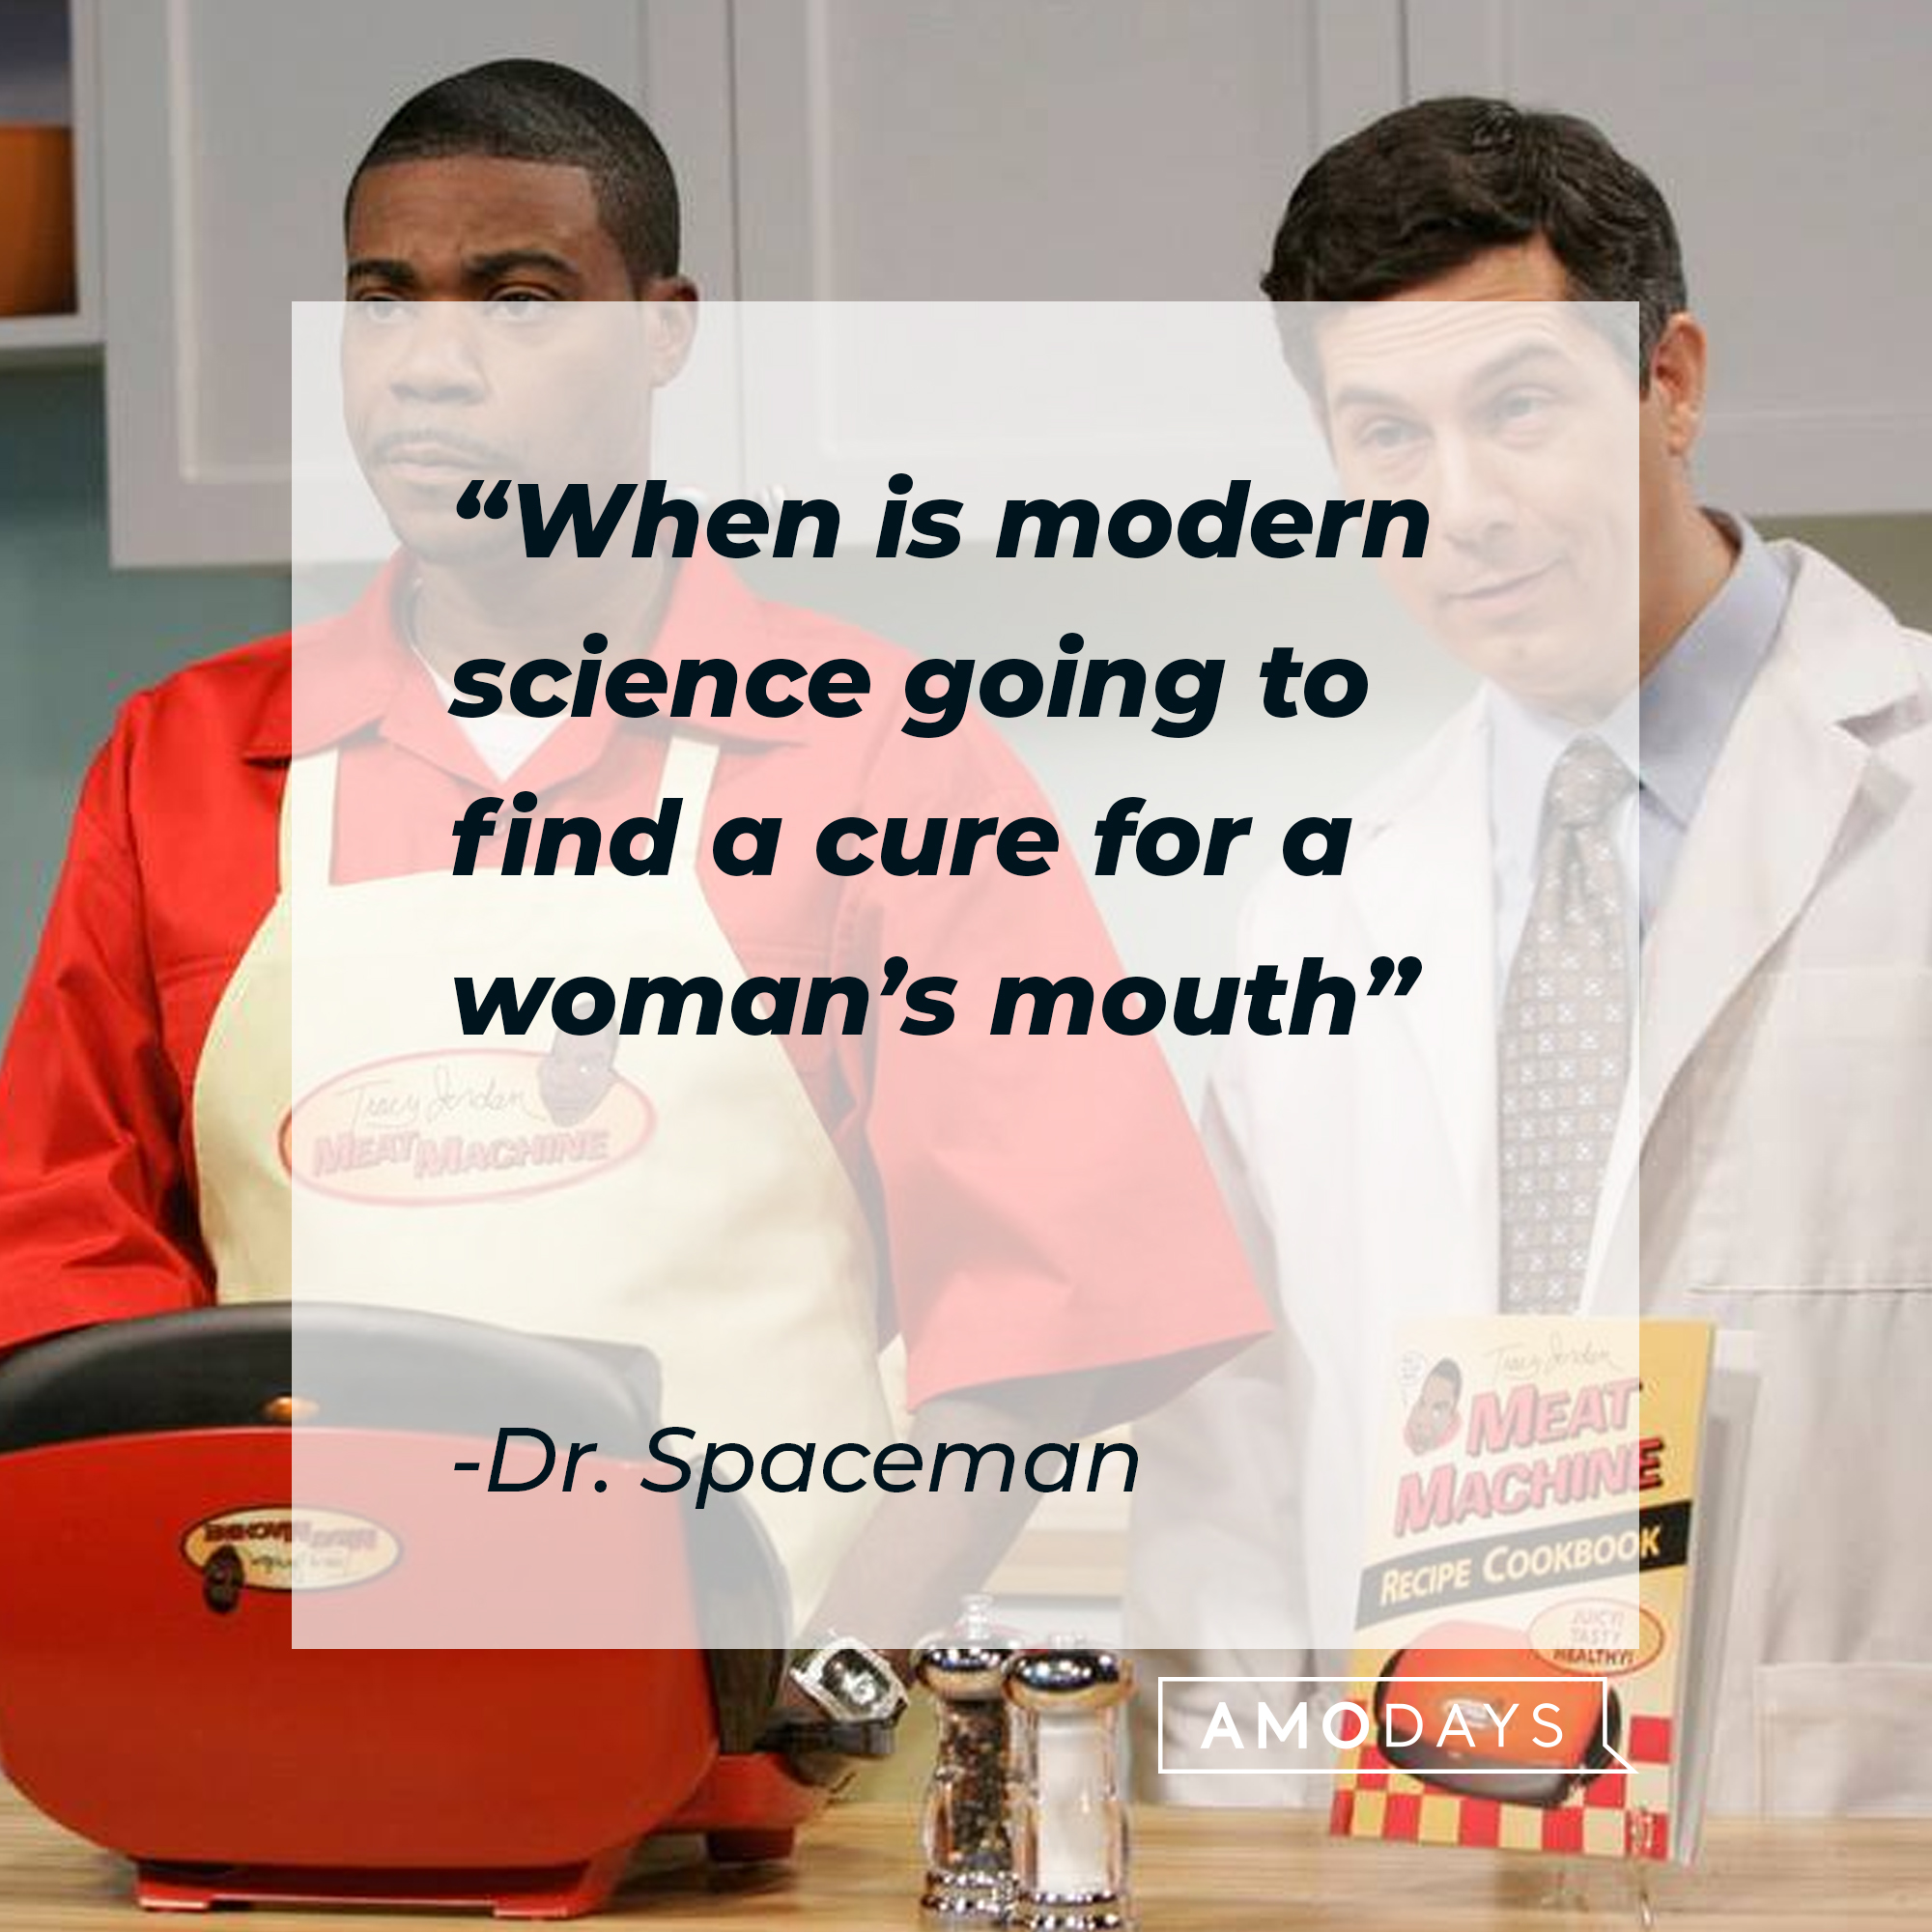 Dr. Spaceman's quote: "When is modern science going to find a cure for a woman’s mouth” | Source: facebook.com/30RockTV